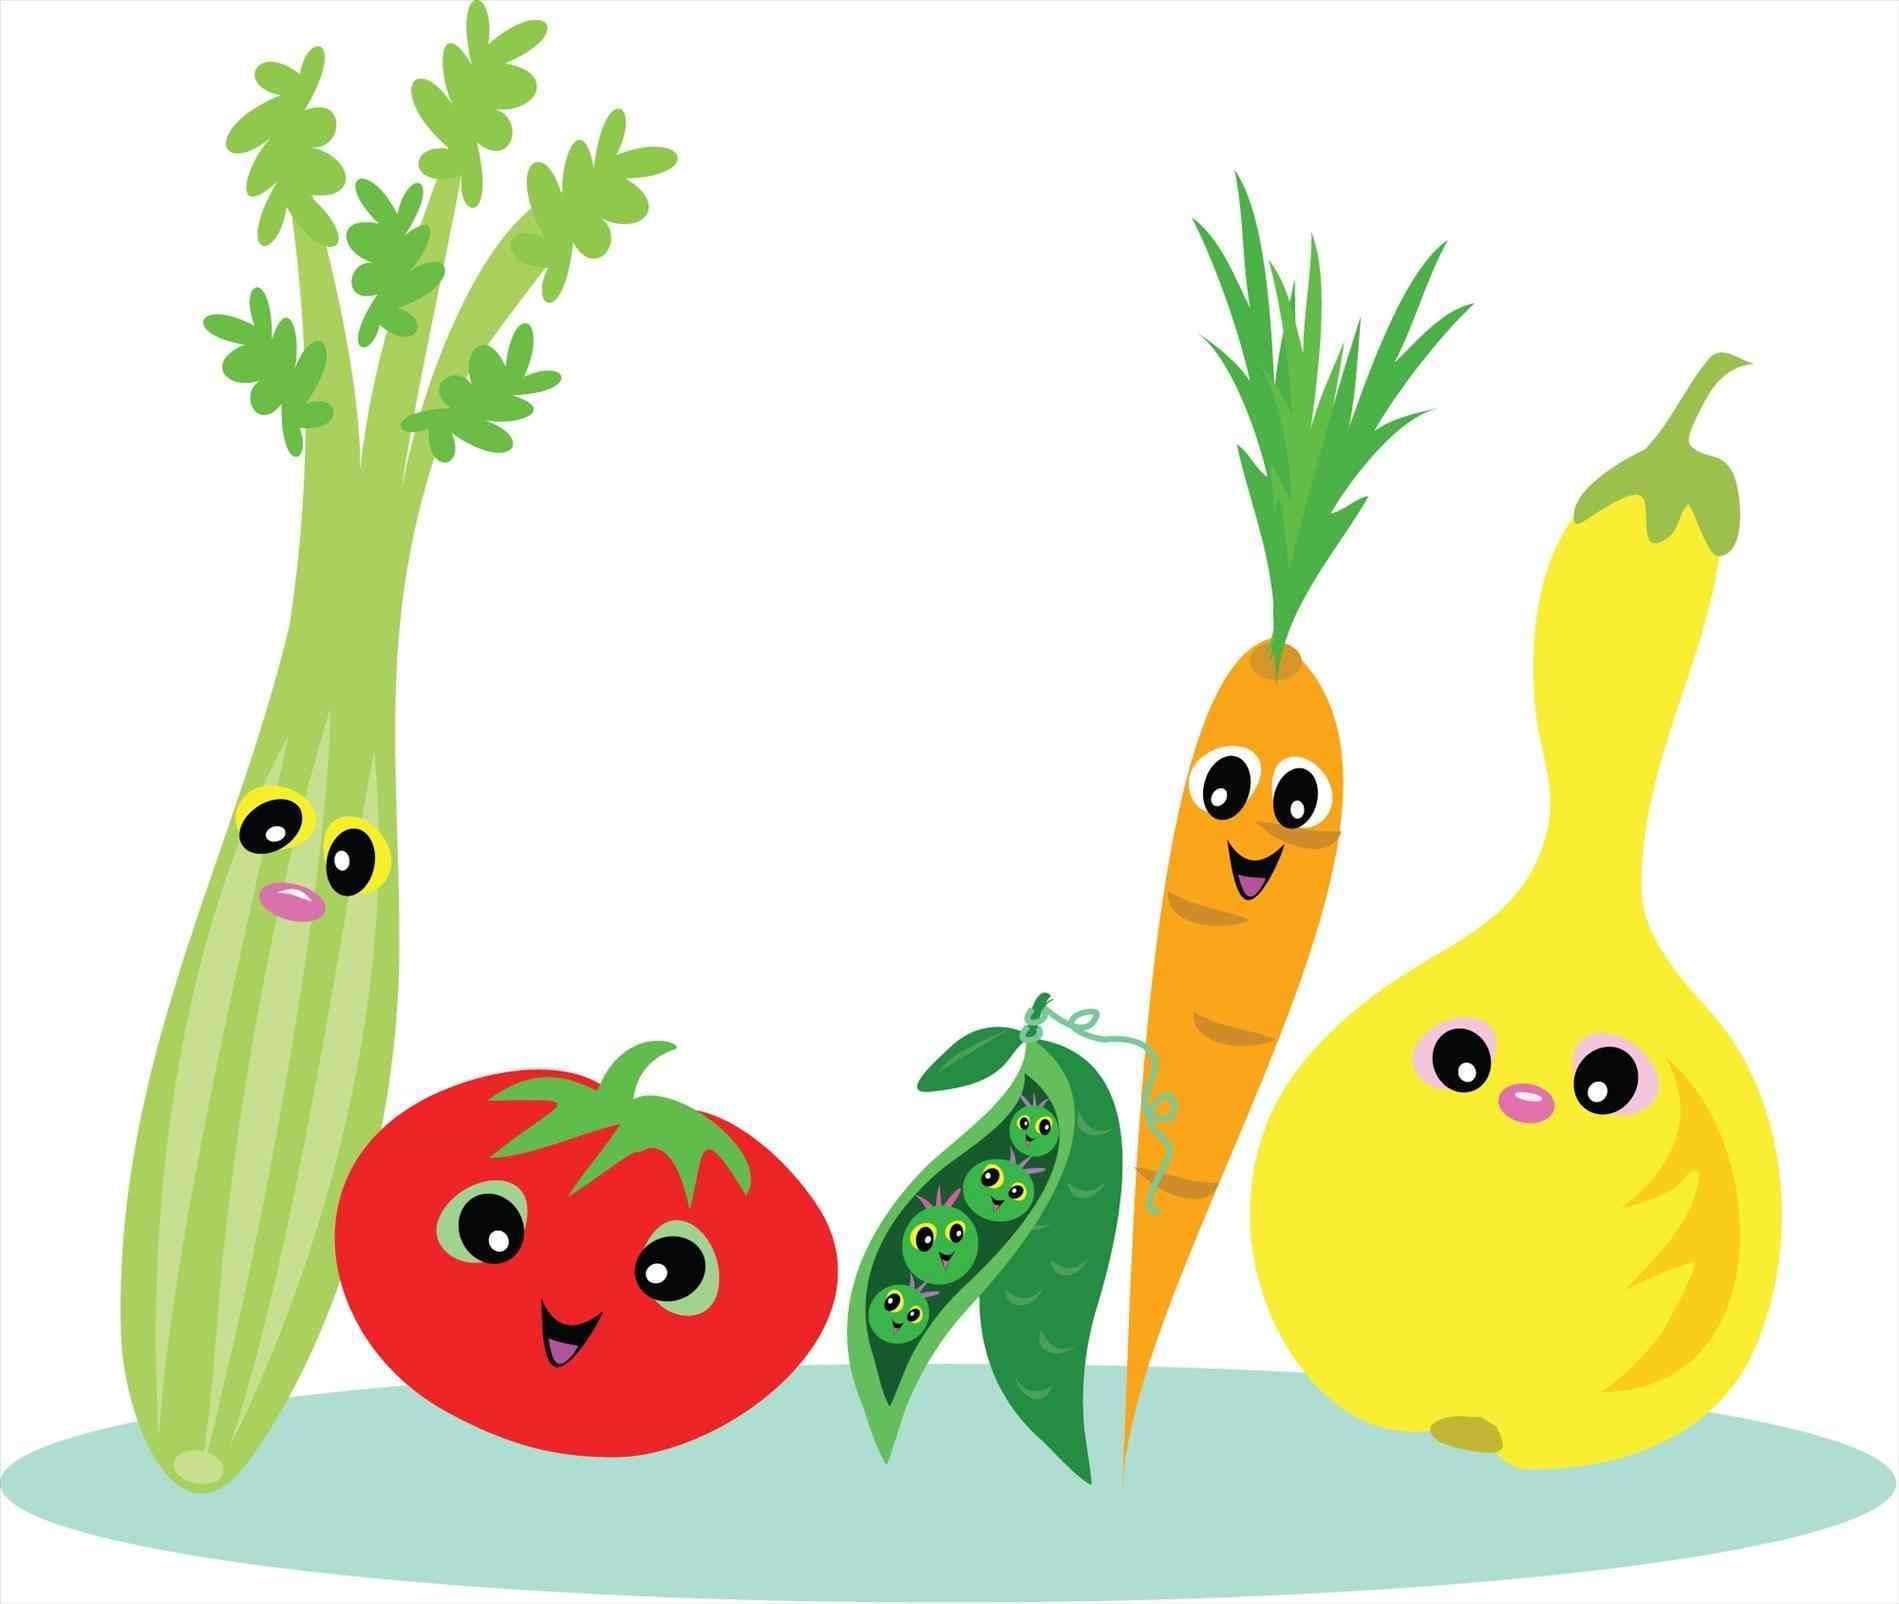 nutrition clipart healthy cooking